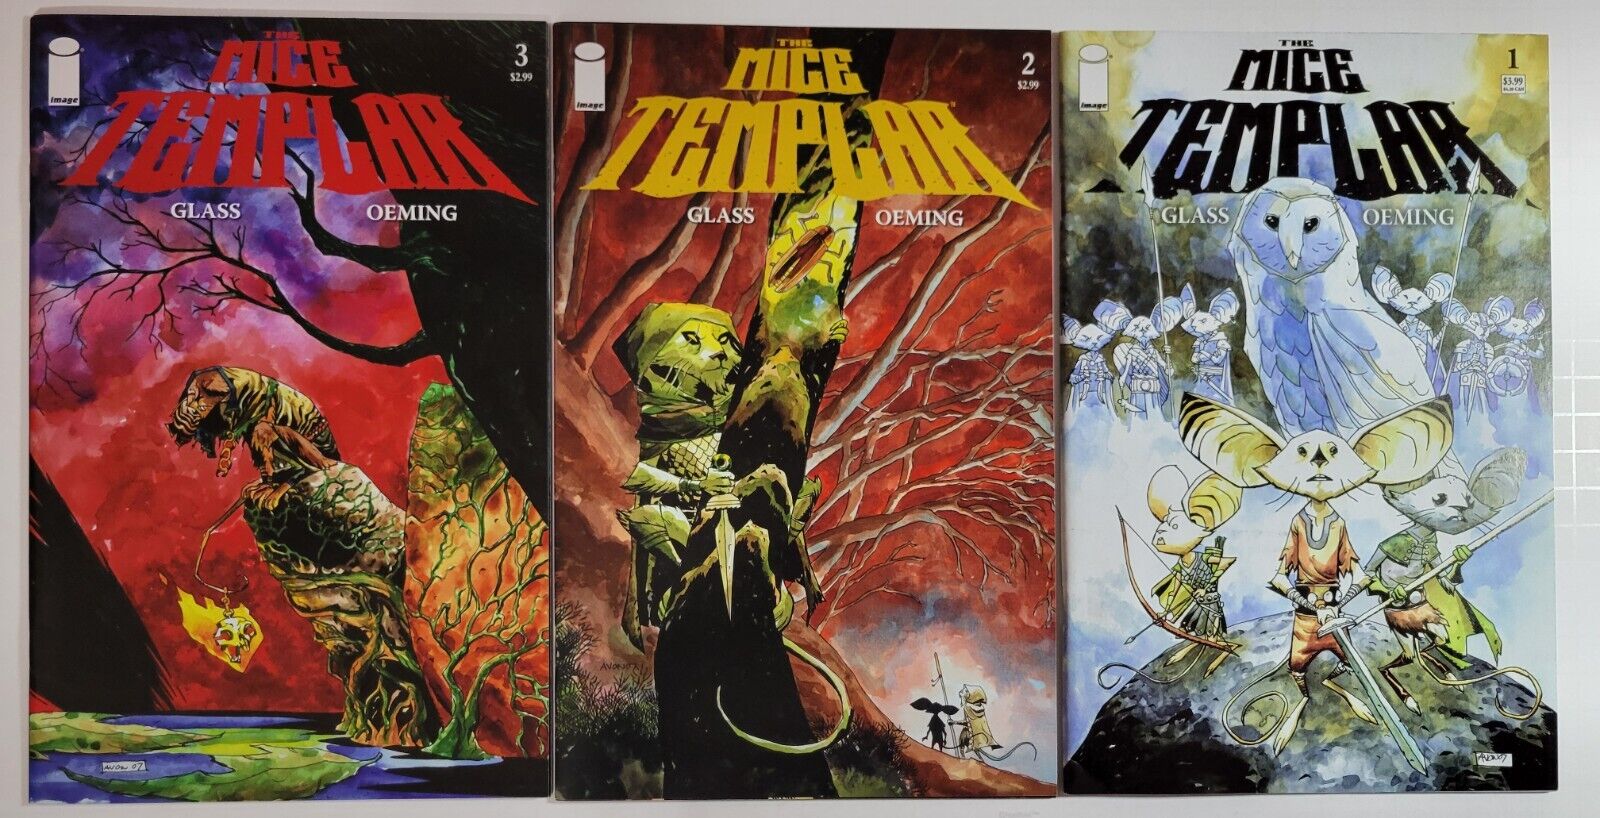 Mice Templar, The #1 #2 #3 Glass Oeming Image 2007 Solid Reader copies. Lot of 3